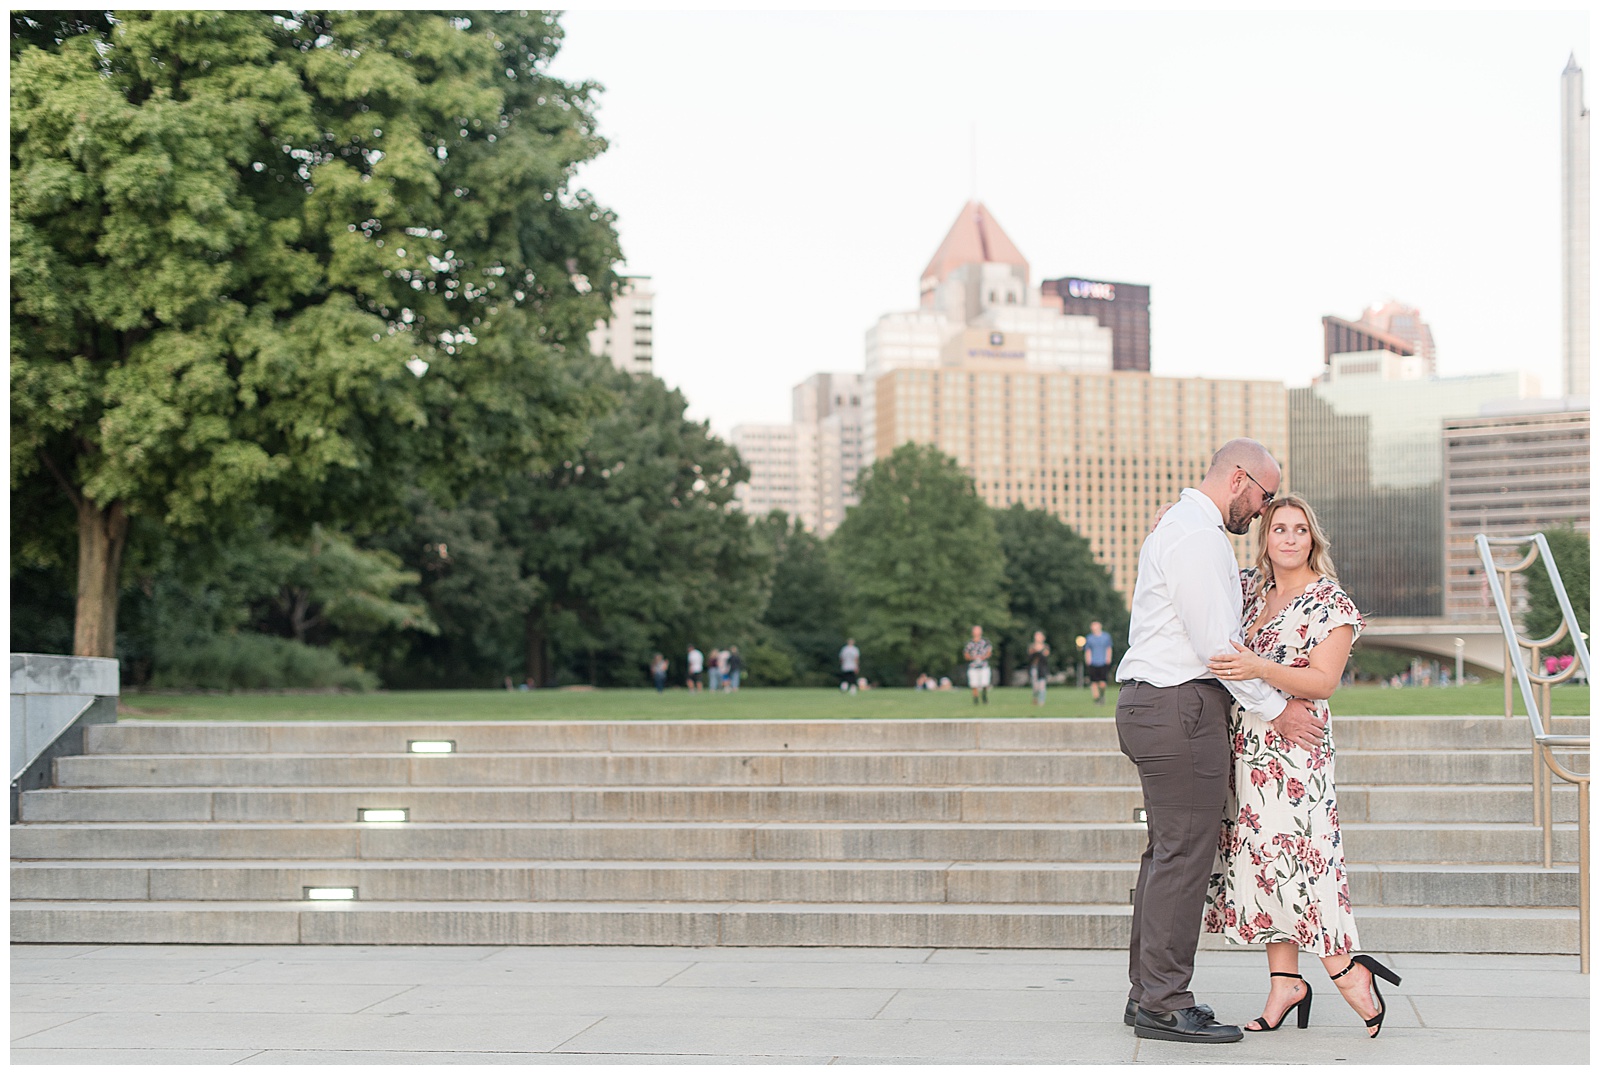 the couple is on the right hand side of the photo facing each other at the bottom of a small set of concrete steps outdoors with large trees and tall buildings behind them and the guy has his arms around the girl and his resting his forehead on the top of the girl's head as she is looking over her left shoulder with her arms also around him in downtown Pittsburgh